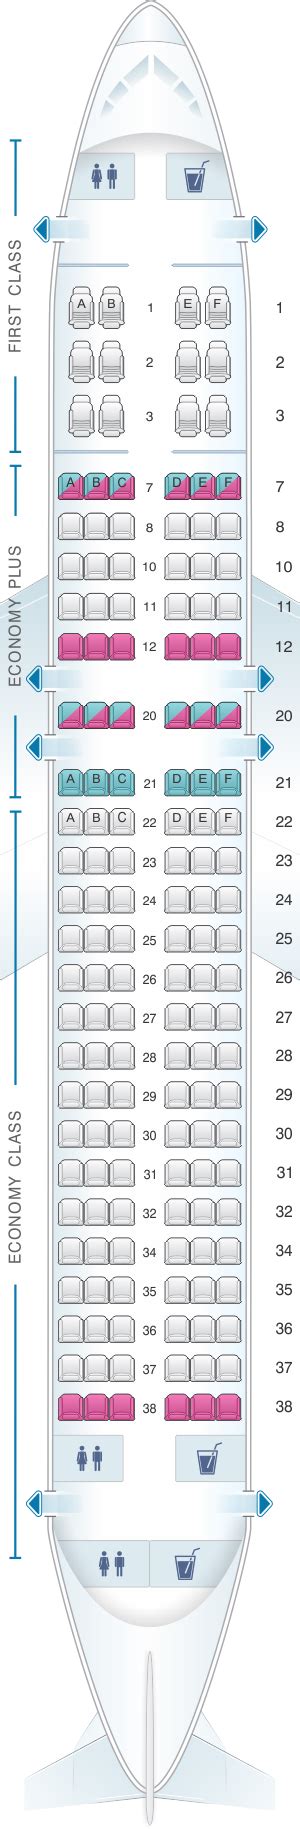 Airbus a320 seat map united. The United Airlines Airbus A321 features seats in a 2 cabin configuration. Economy has 154 seats; Business class has 20 seats; this is pretty standard for these aircraft. Legroom-wise, the Economy pitch of " is average, the Business class pitch of " is average, though of course what that means for you depends on how tall you are! 